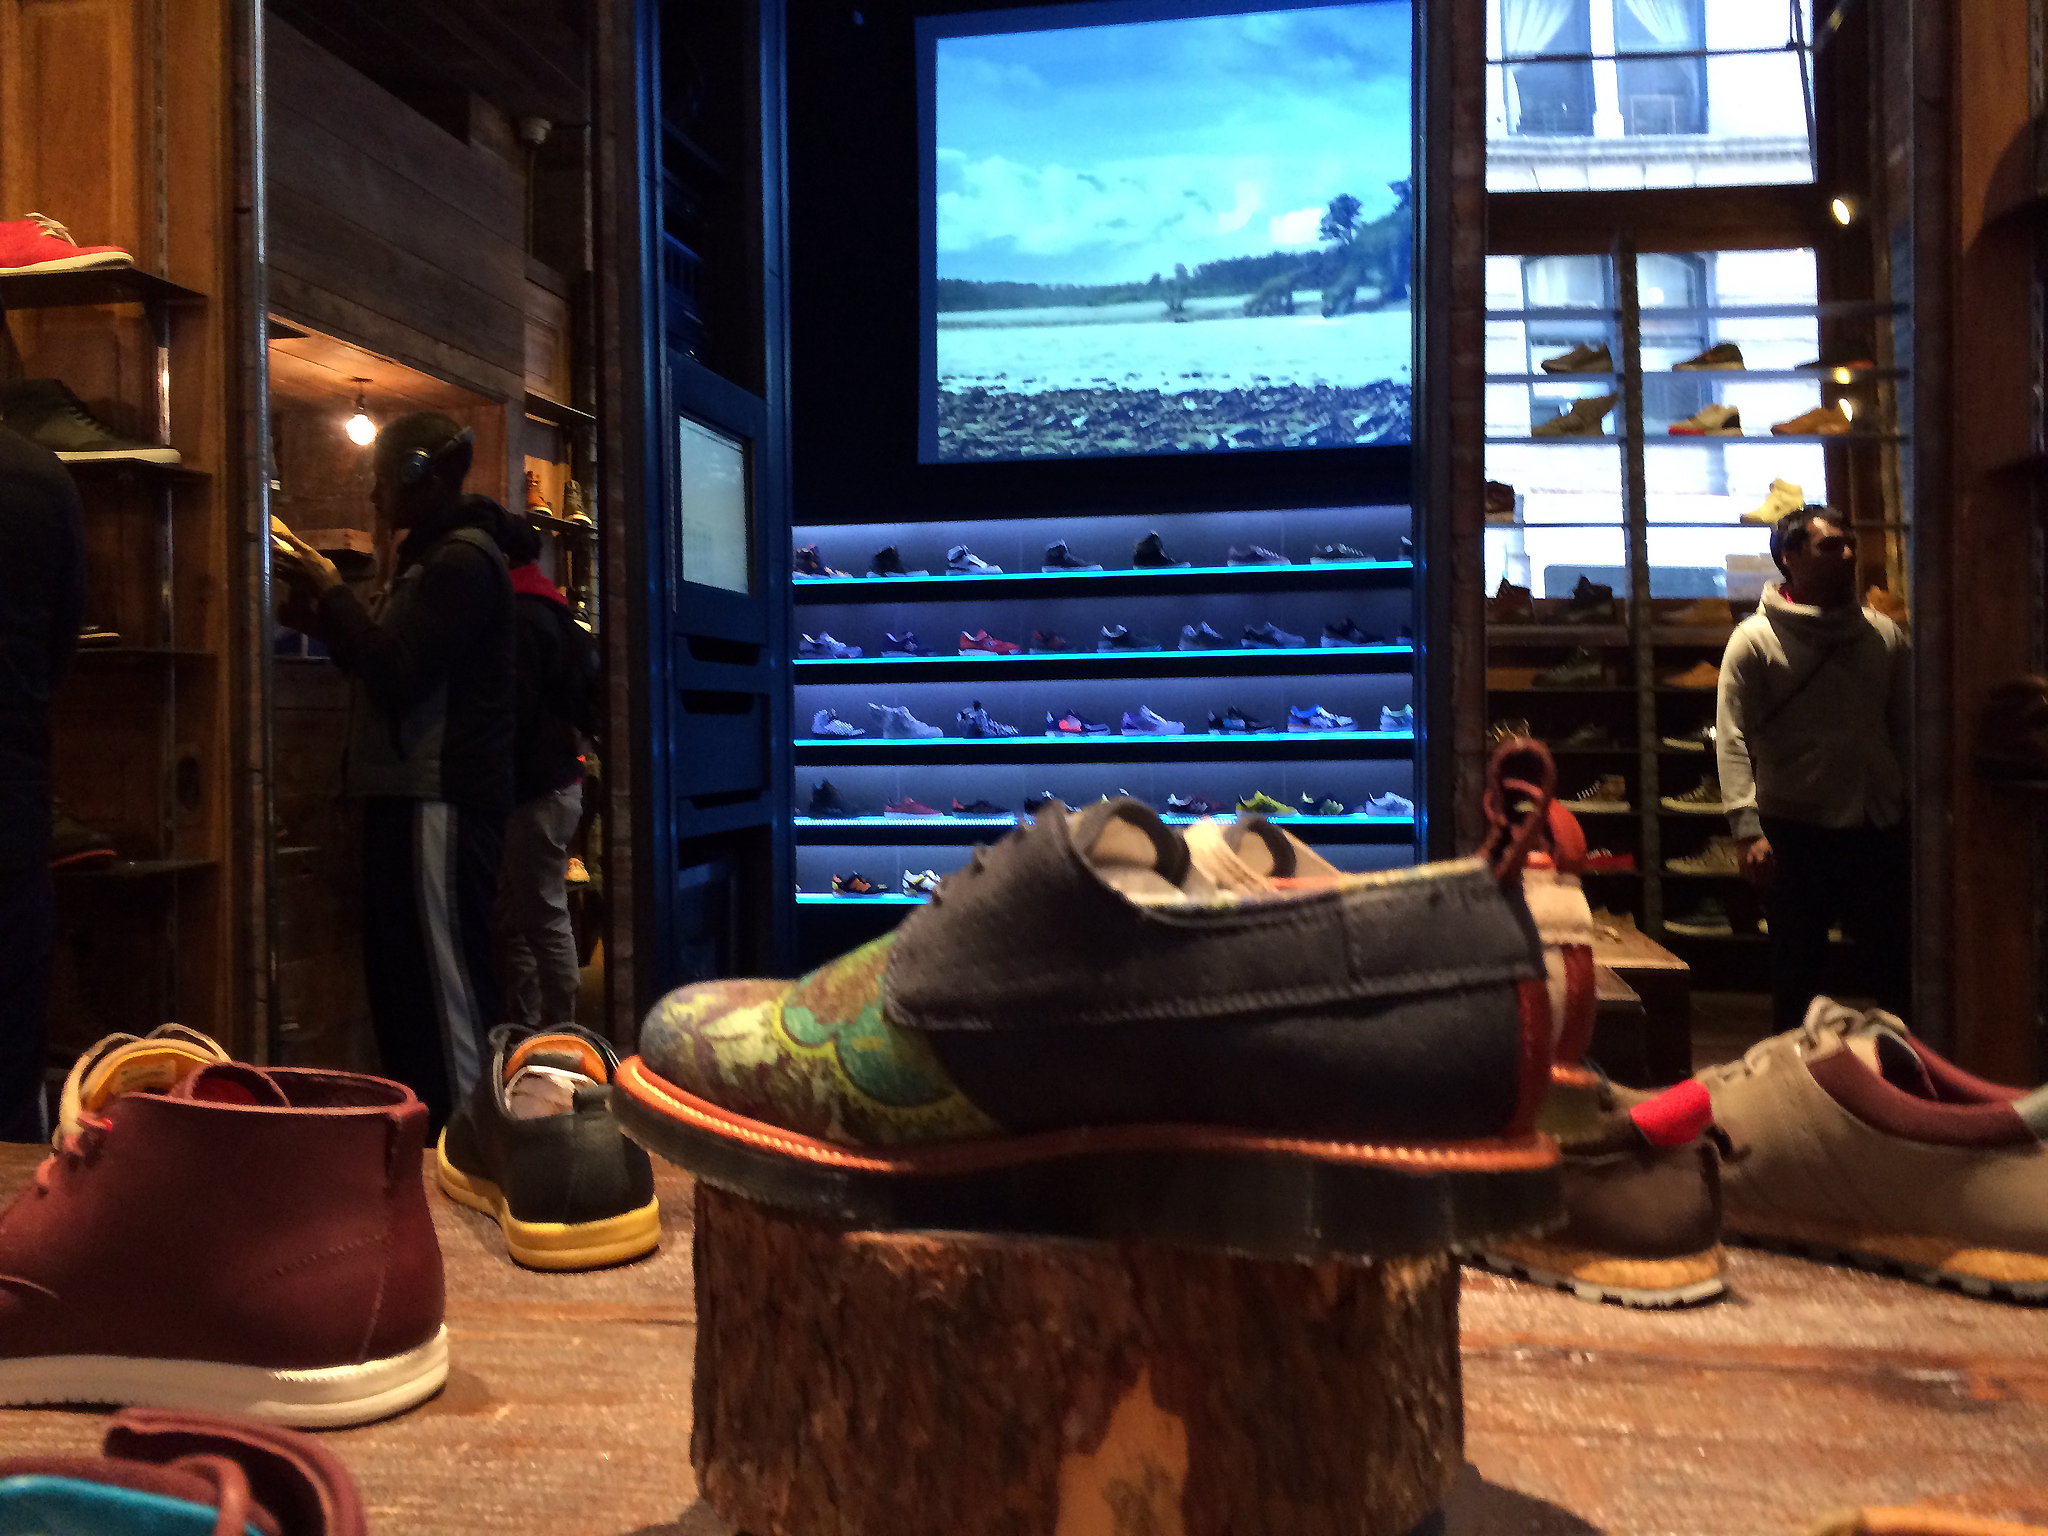 Men's shoes at Kith in New York. Photo by alphacityguides.